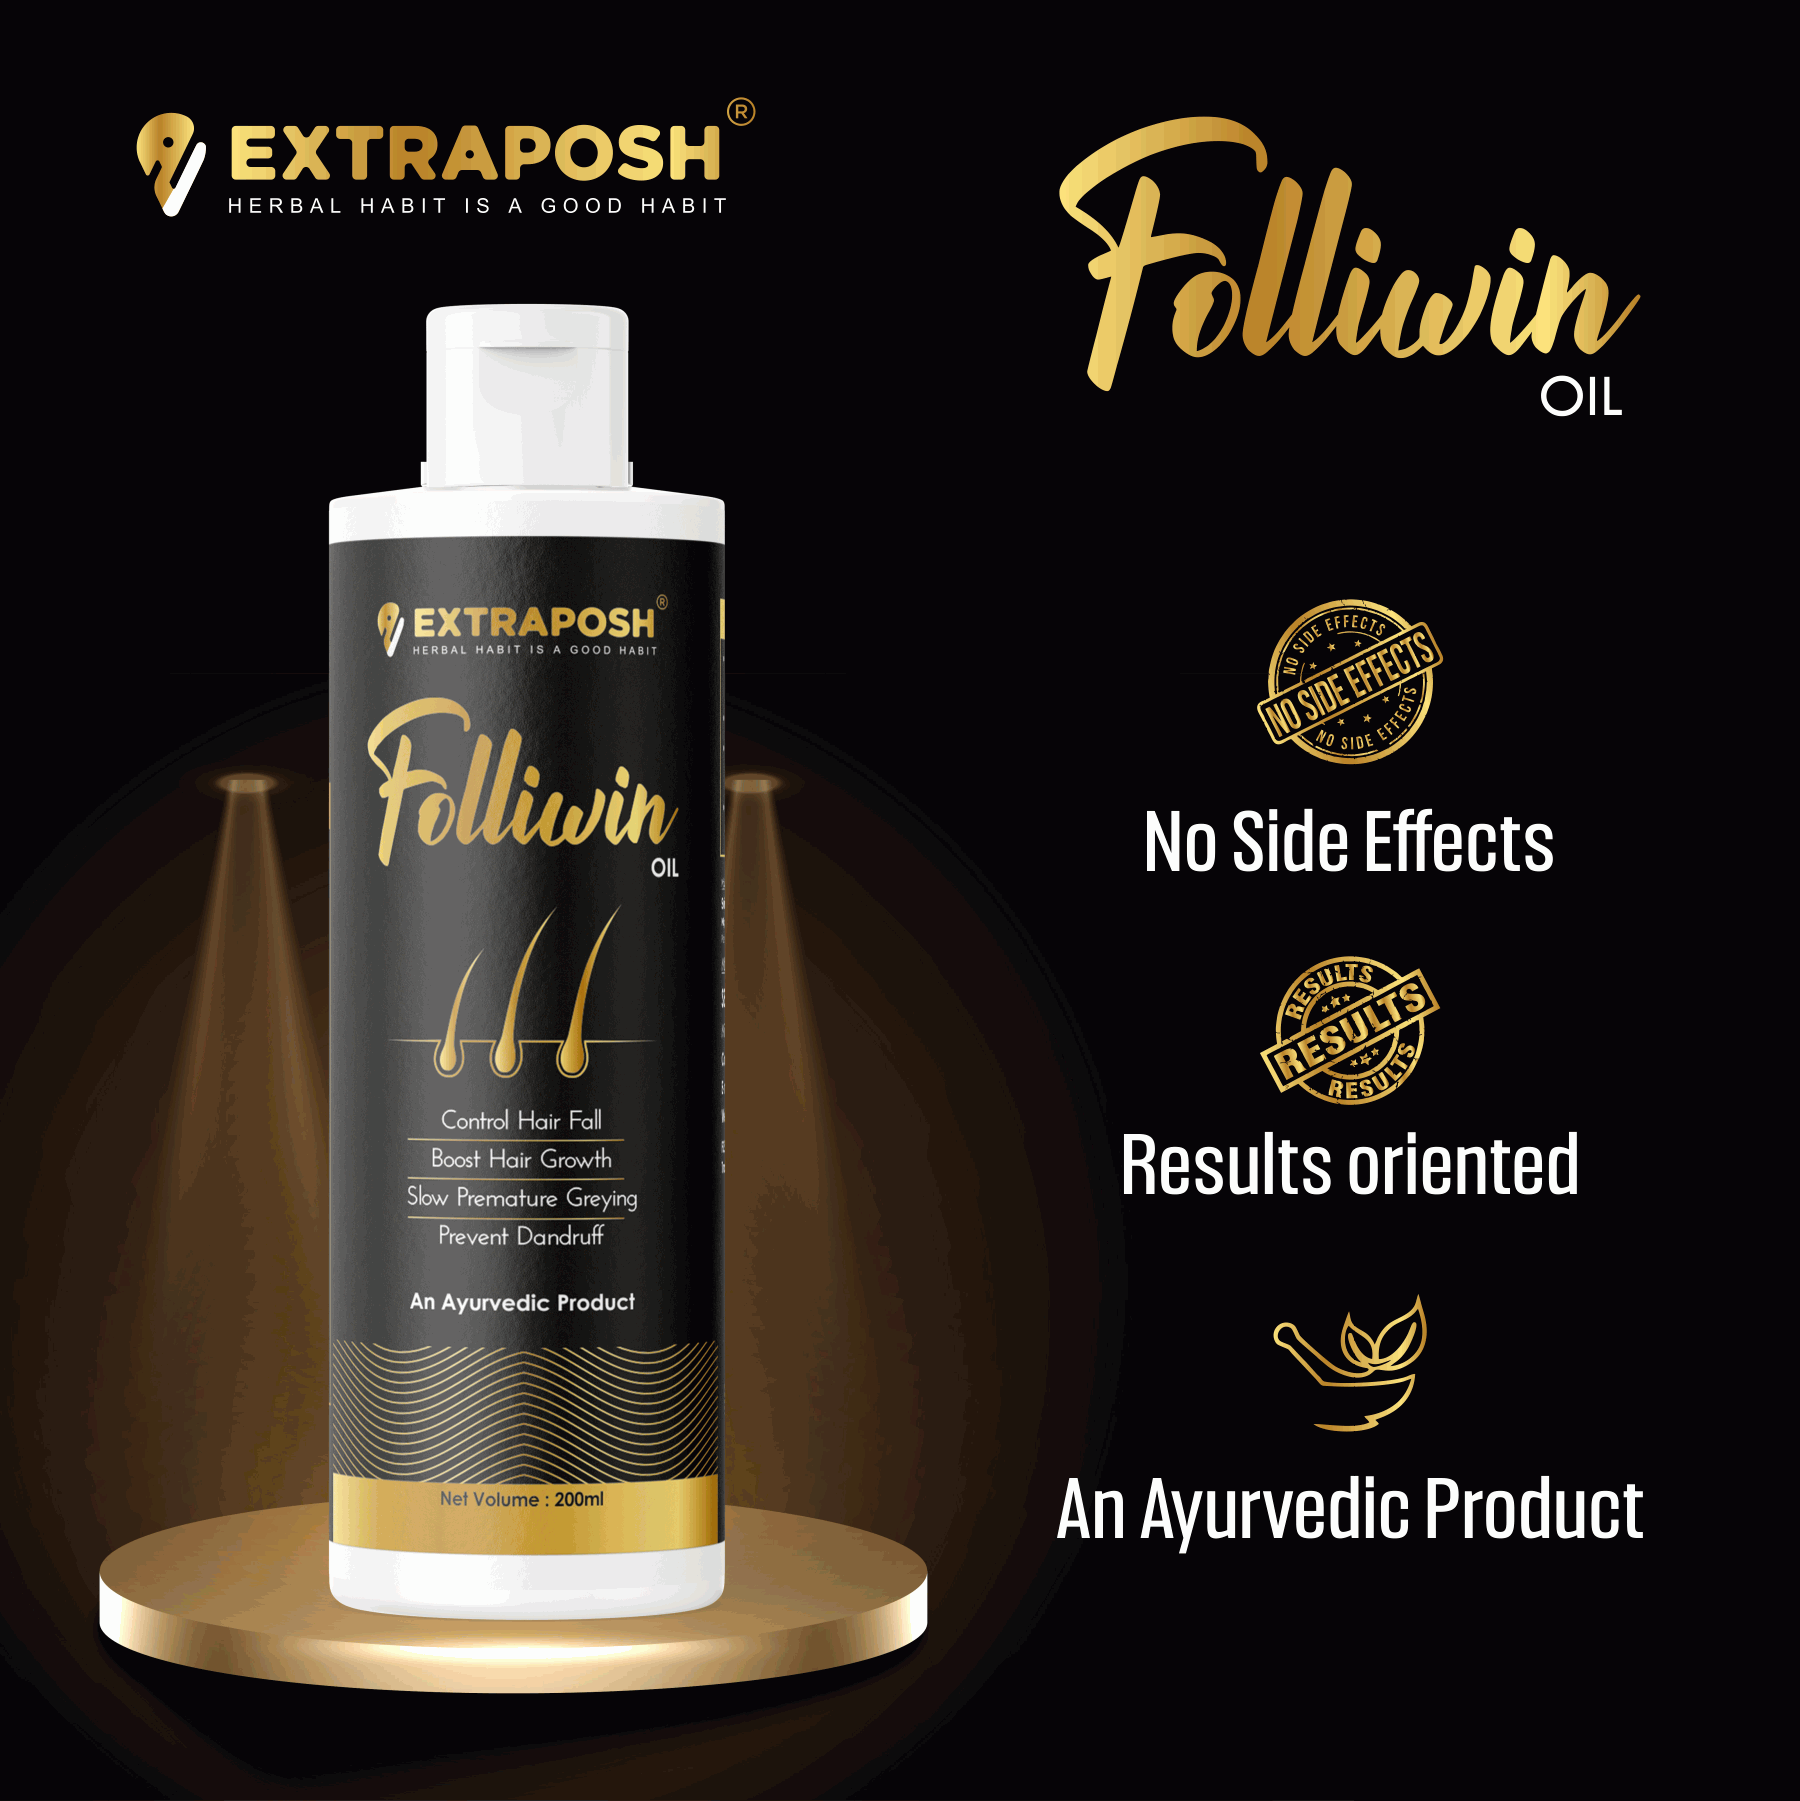 Extraposh Folliwin Hair oil is An Ayurvedic Oil and Results oriented in nature having no any side effects